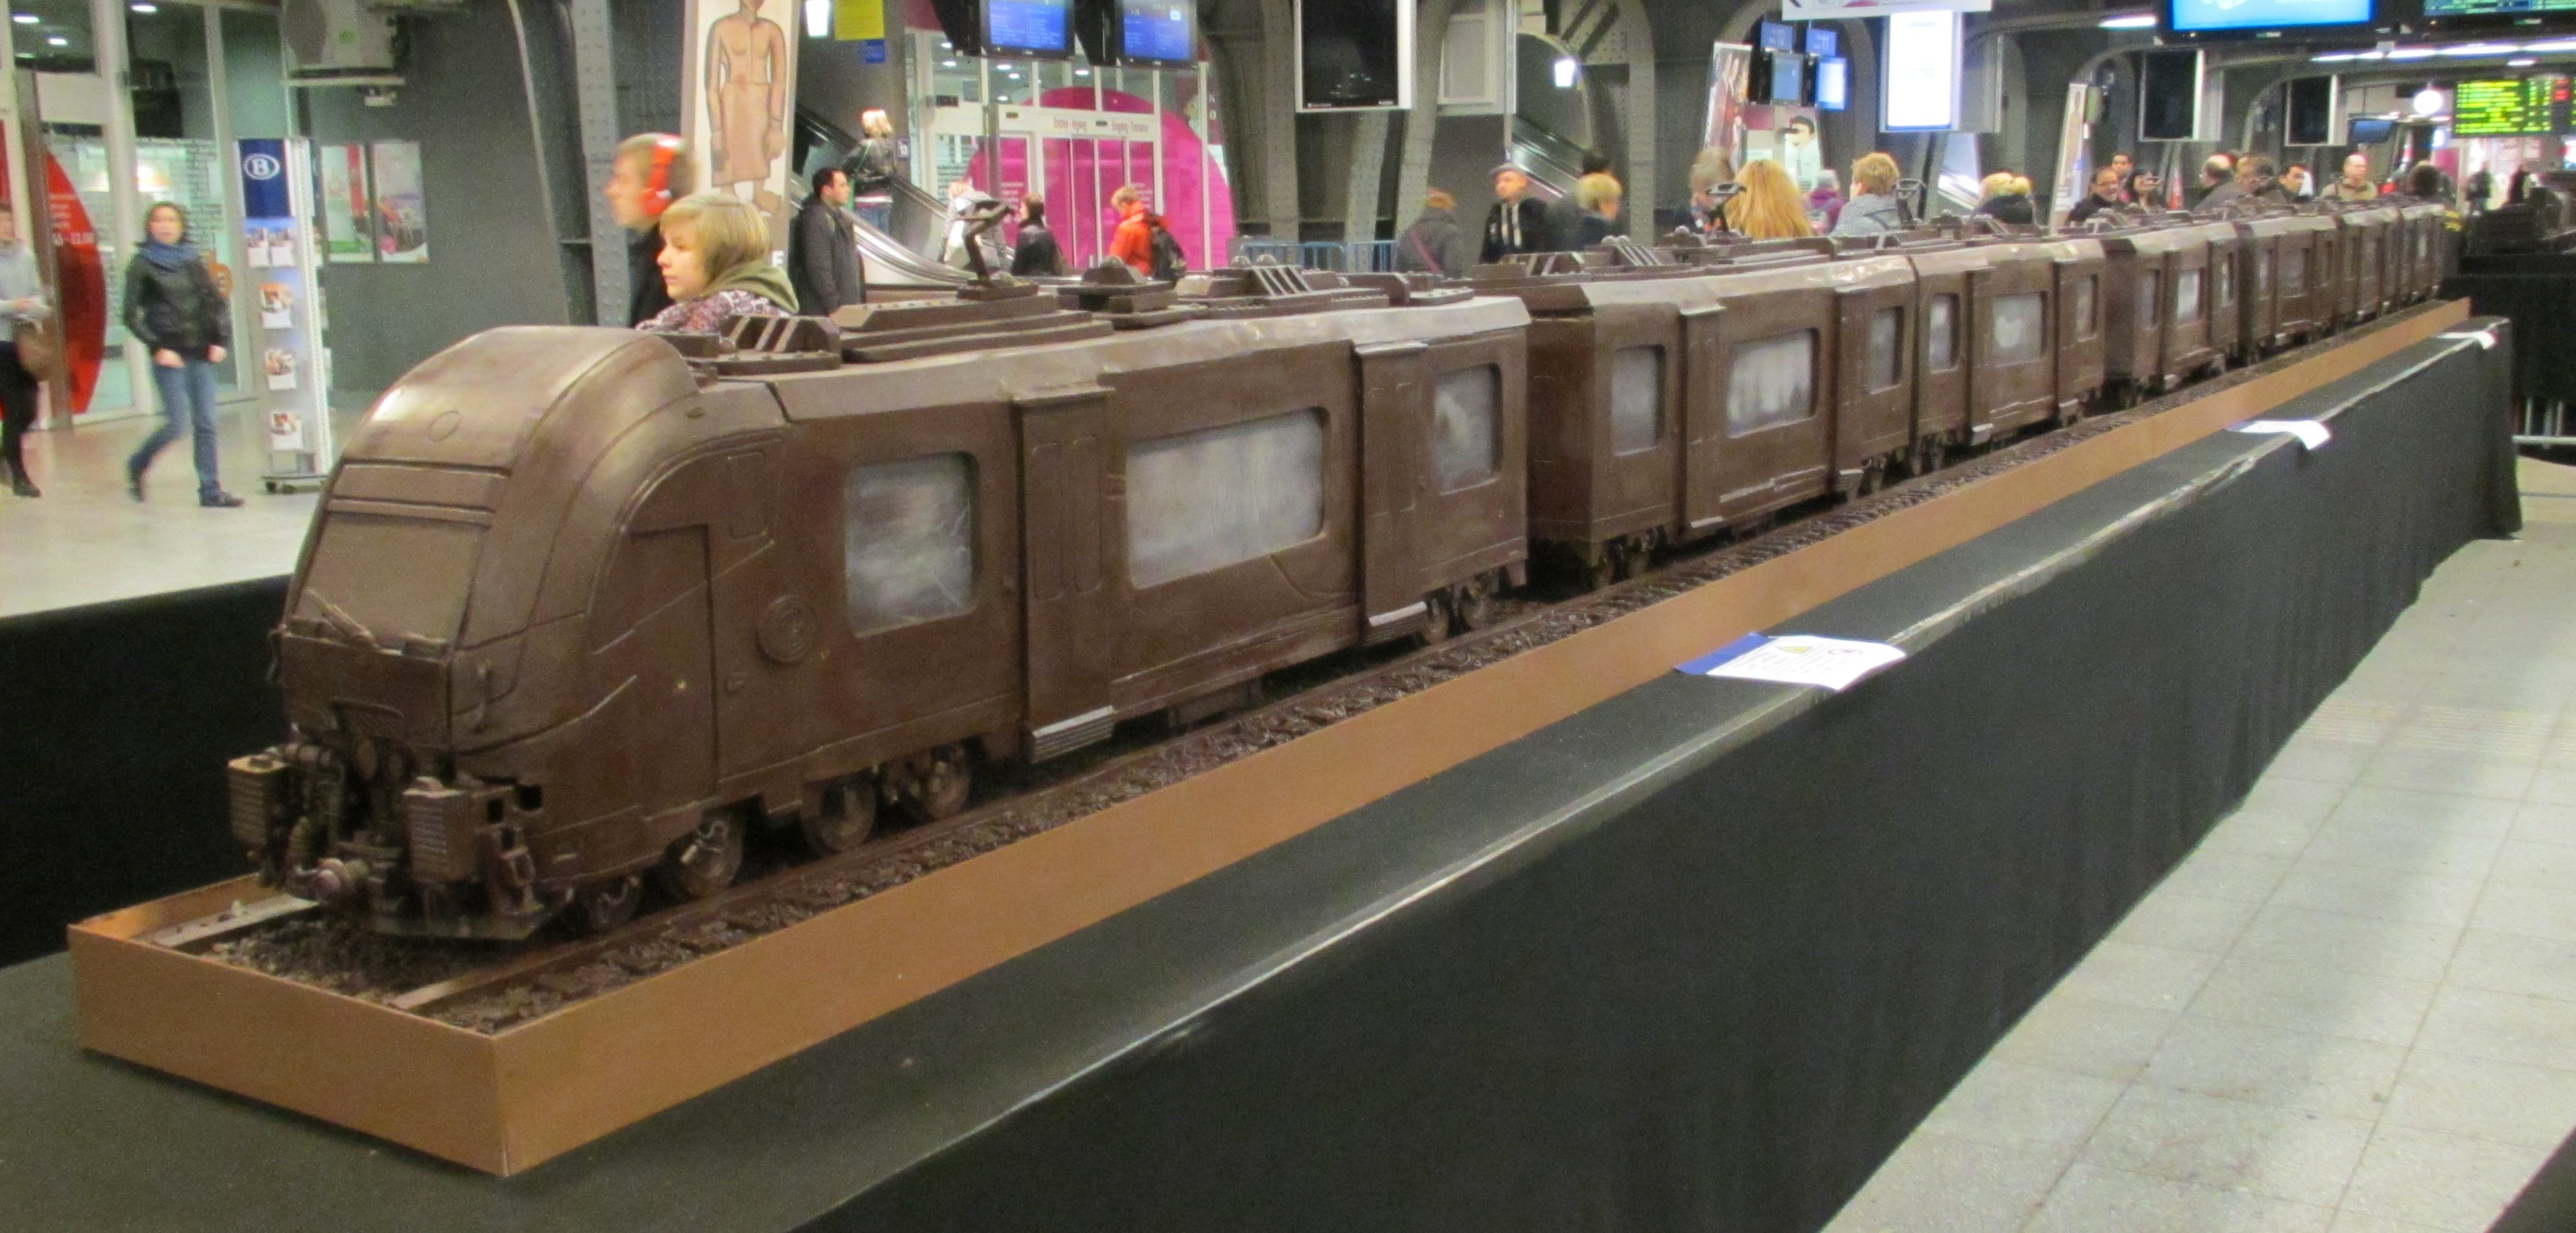 Check Out These Amazing Chocolate Sculptures